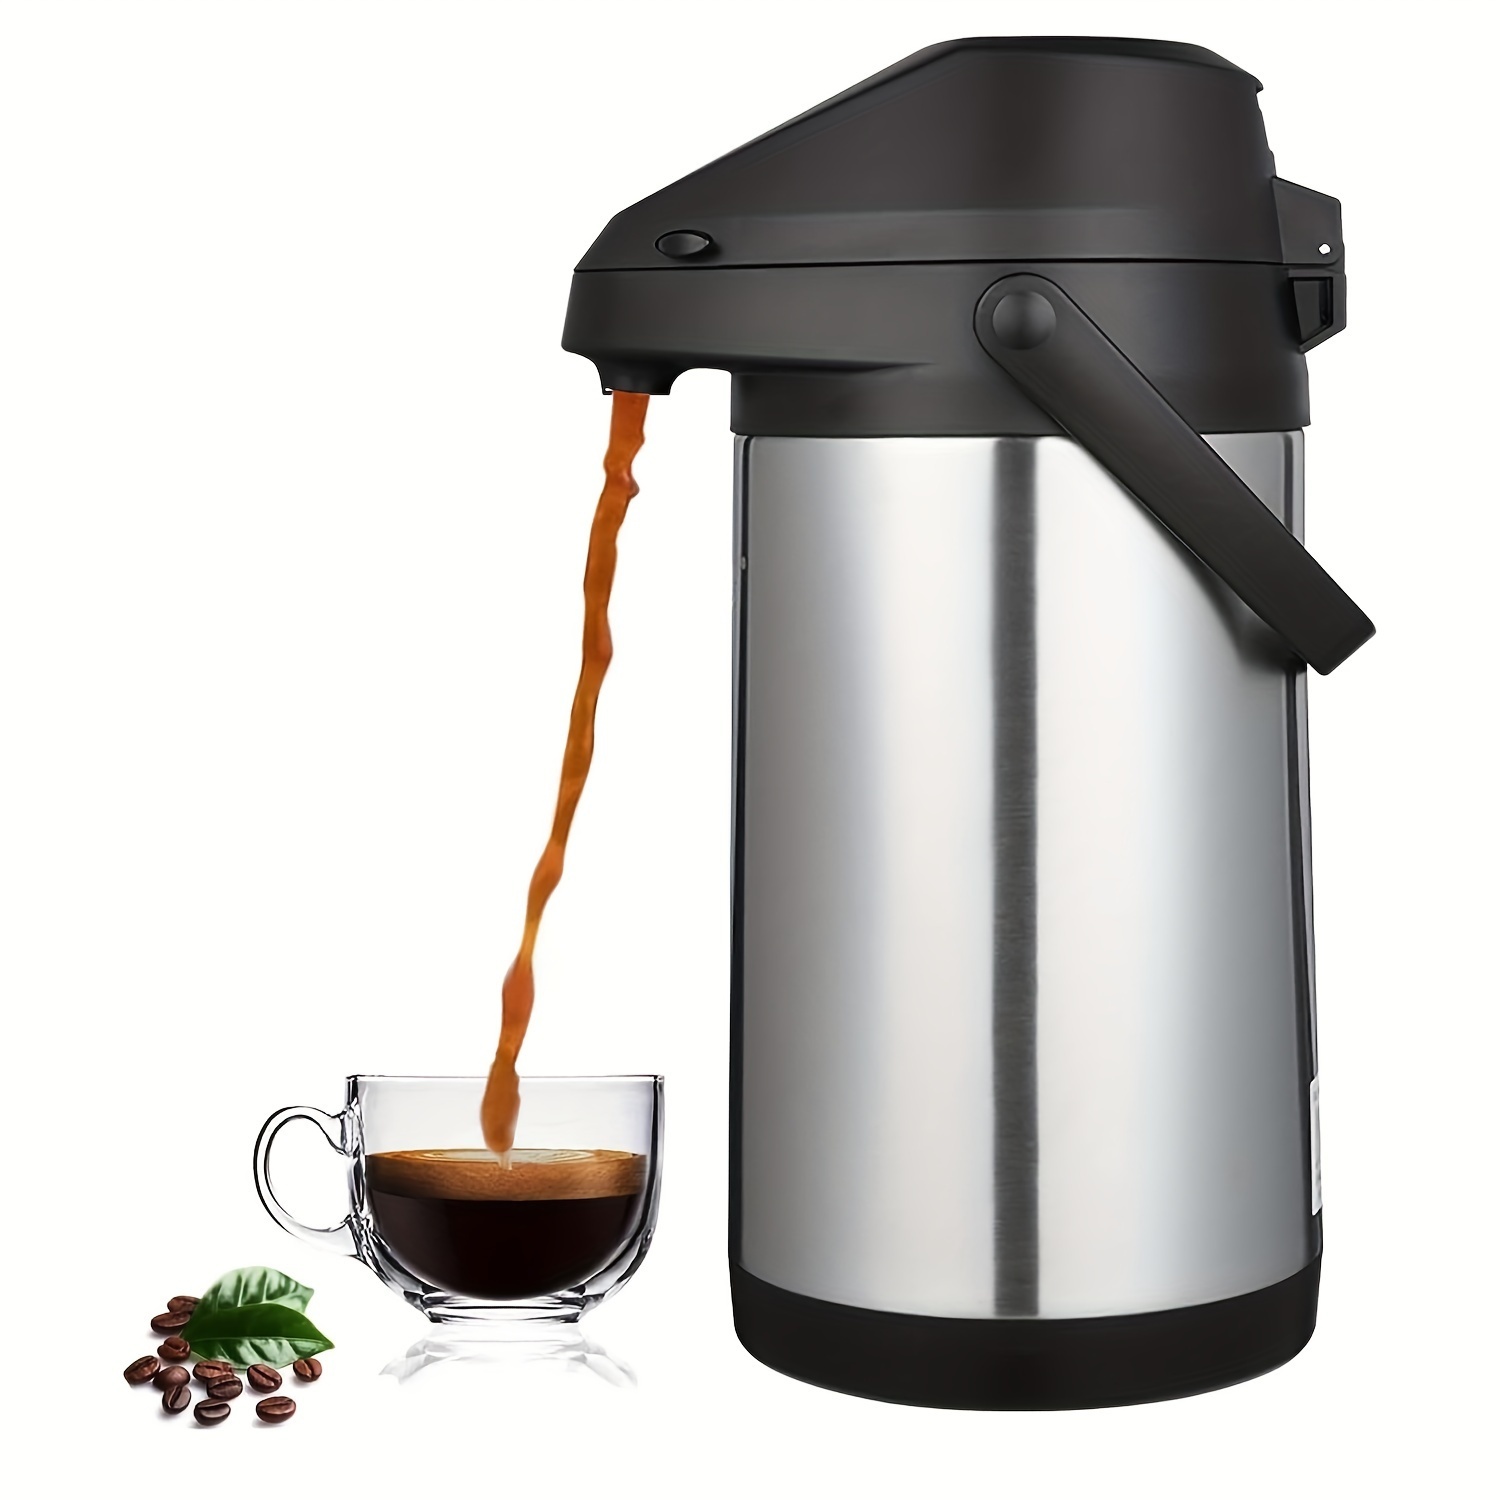 2.5L airpot coffee dispenser with pump 24hour thermal insulated hot  beverage dispenser for coffee, any liquid or drink